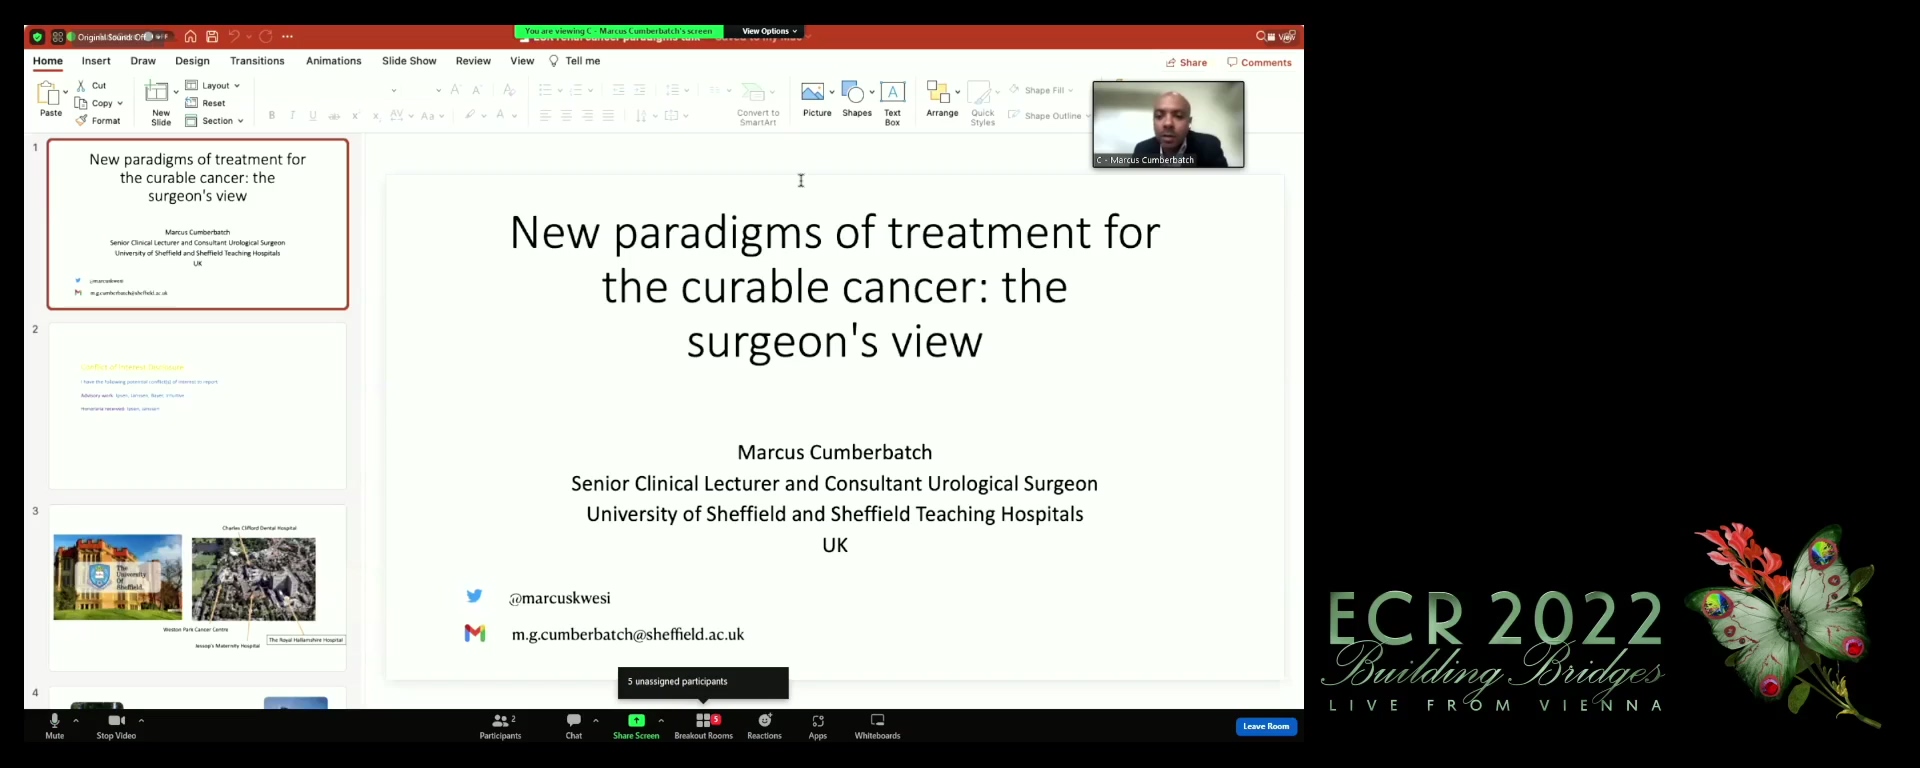 New paradigms of treatment for the curable cancer: the surgeon's view